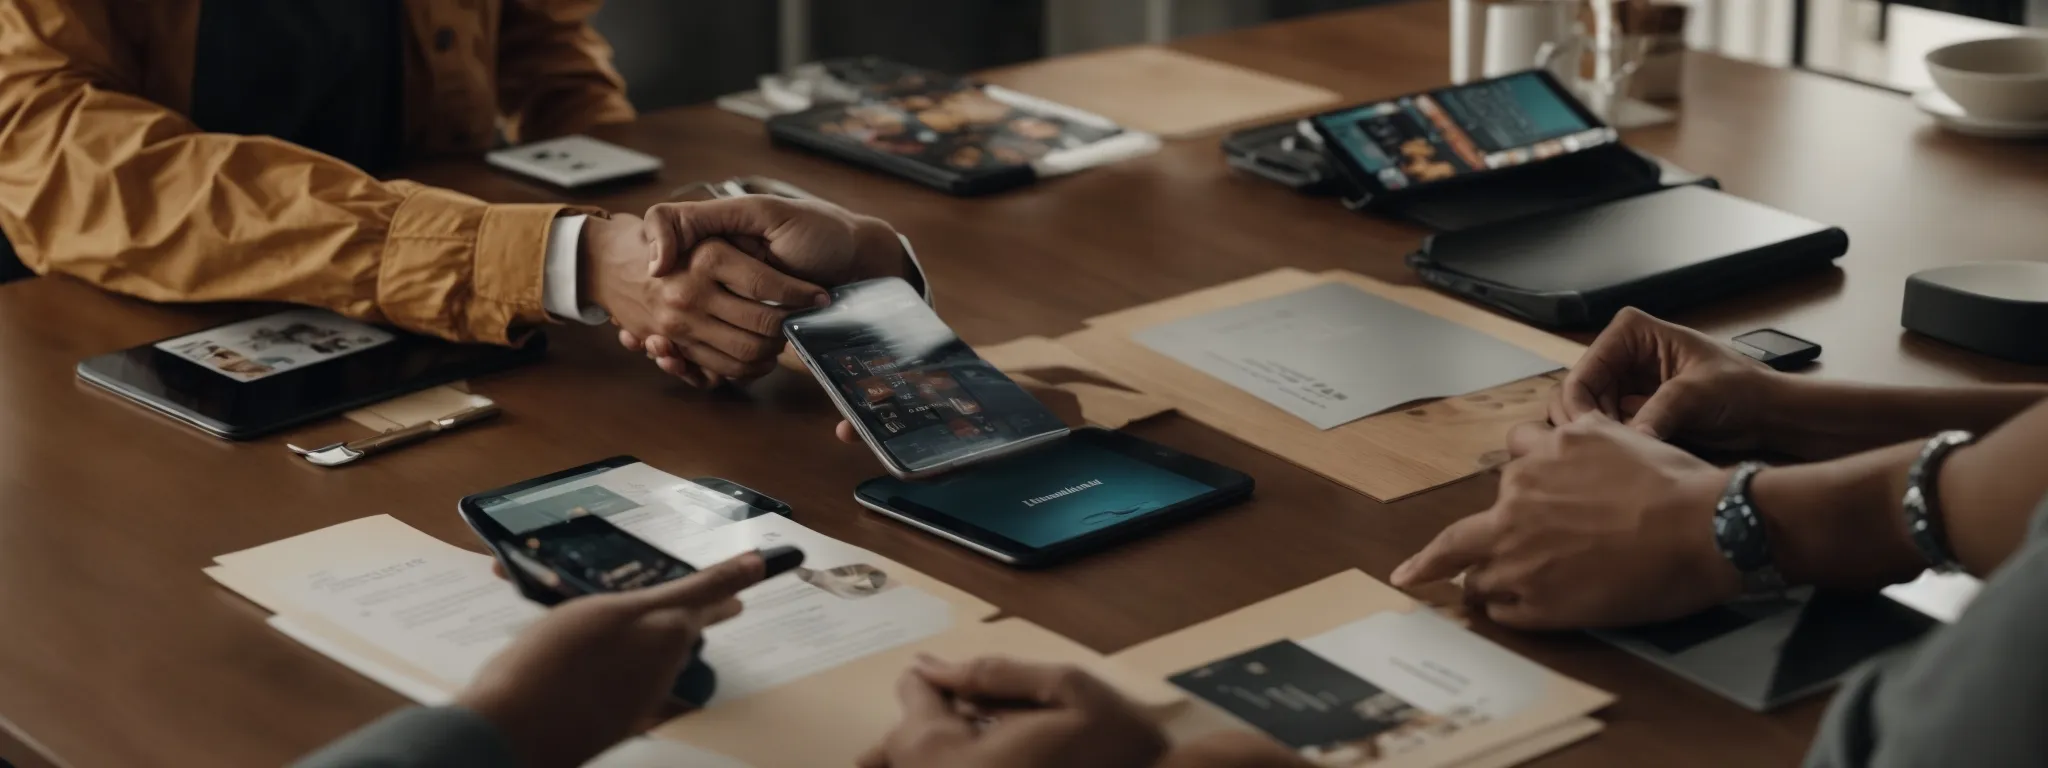 two professionals shaking hands across a table with digital devices and marketing materials spread out before them.